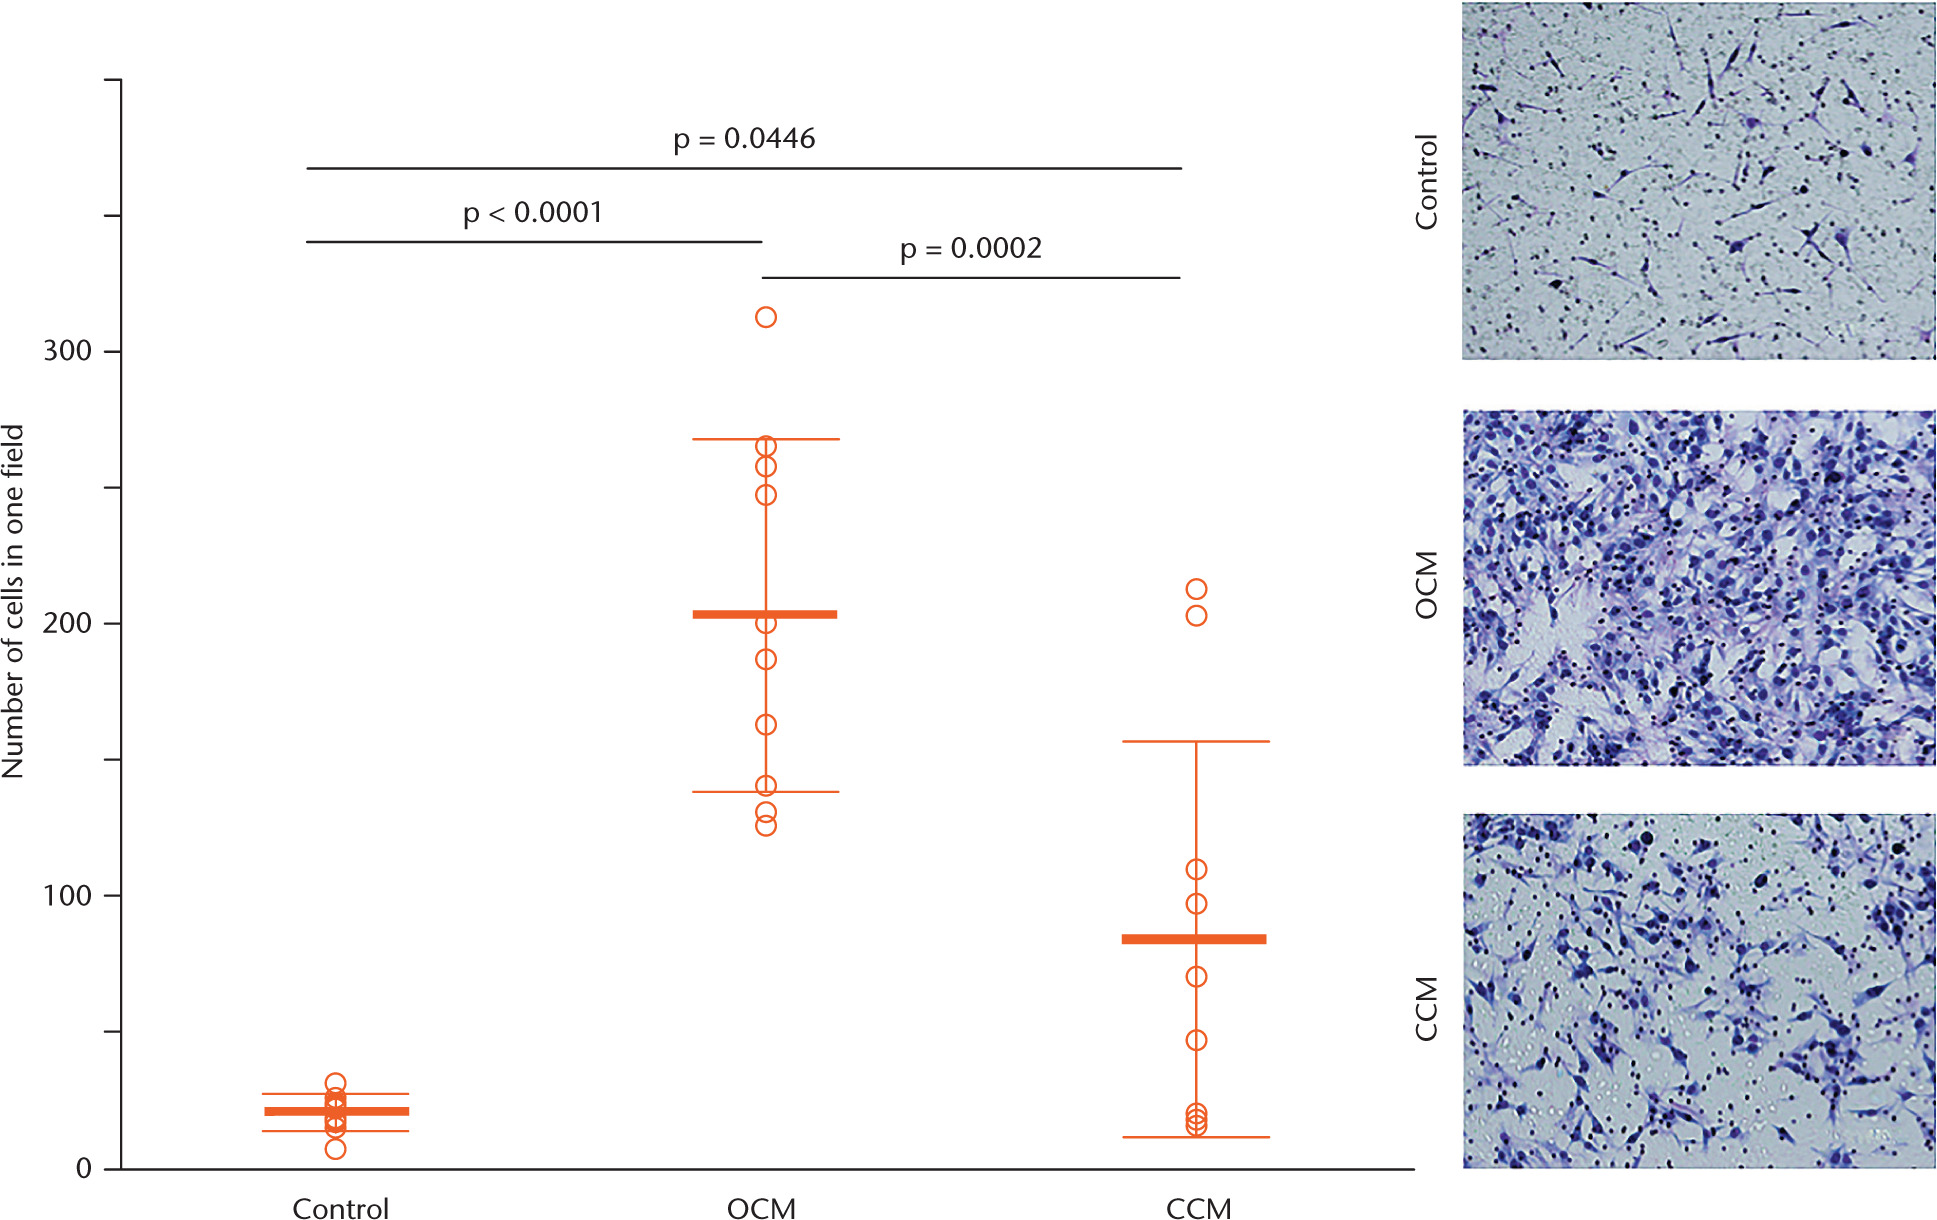 Fig. 7 
            Migration assay using Transwell chambers, showing a significantly higher migration activity of MG-63 cells towards osteophyte-conditioned medium than towards cancellous bone-conditioned medium and the untreated control after six hours of incubation. The cells were counted in three randomly selected microscopic fields (×400) and the mean taken, with representative images shown for the ten experiments (original magnification, ×400). The results are reported as mean and standard deviation. Statistical analysis was performed using one-way analysis of variance with Tukey’s post hoc test (all n = 10). OCM, osteophyte-conditioned medium; CCM, cancellous bone-conditioned medium.
          